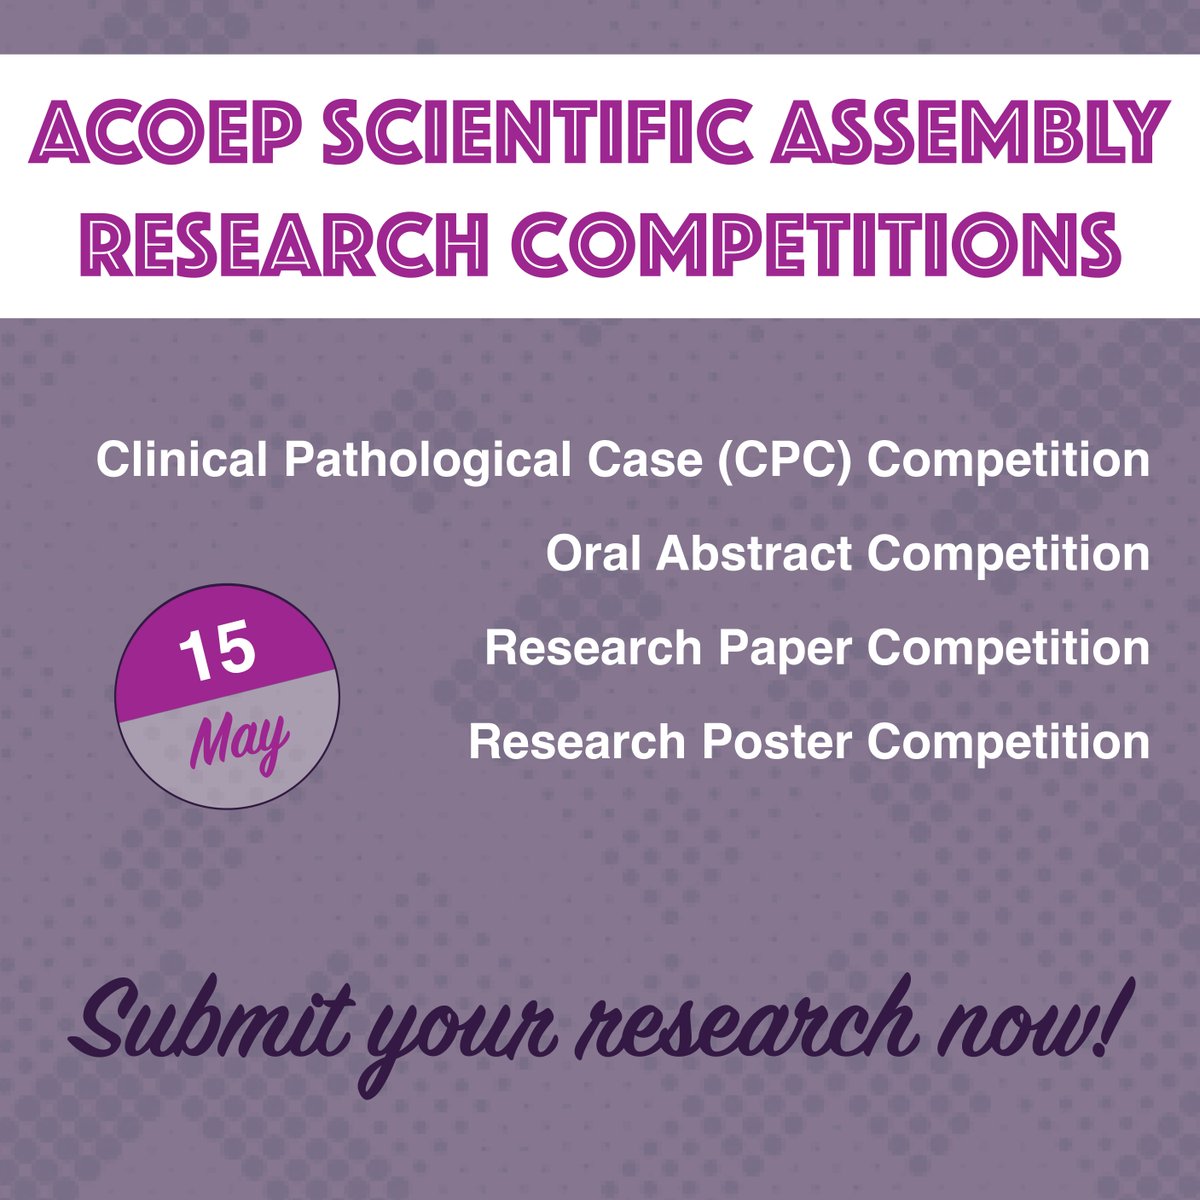 One week left to submit your research! Participate in our research competitions and have the chance to present live and win great prizes! Deadline is May 15th. #ACOEP23 ow.ly/3NXa50O2uu7